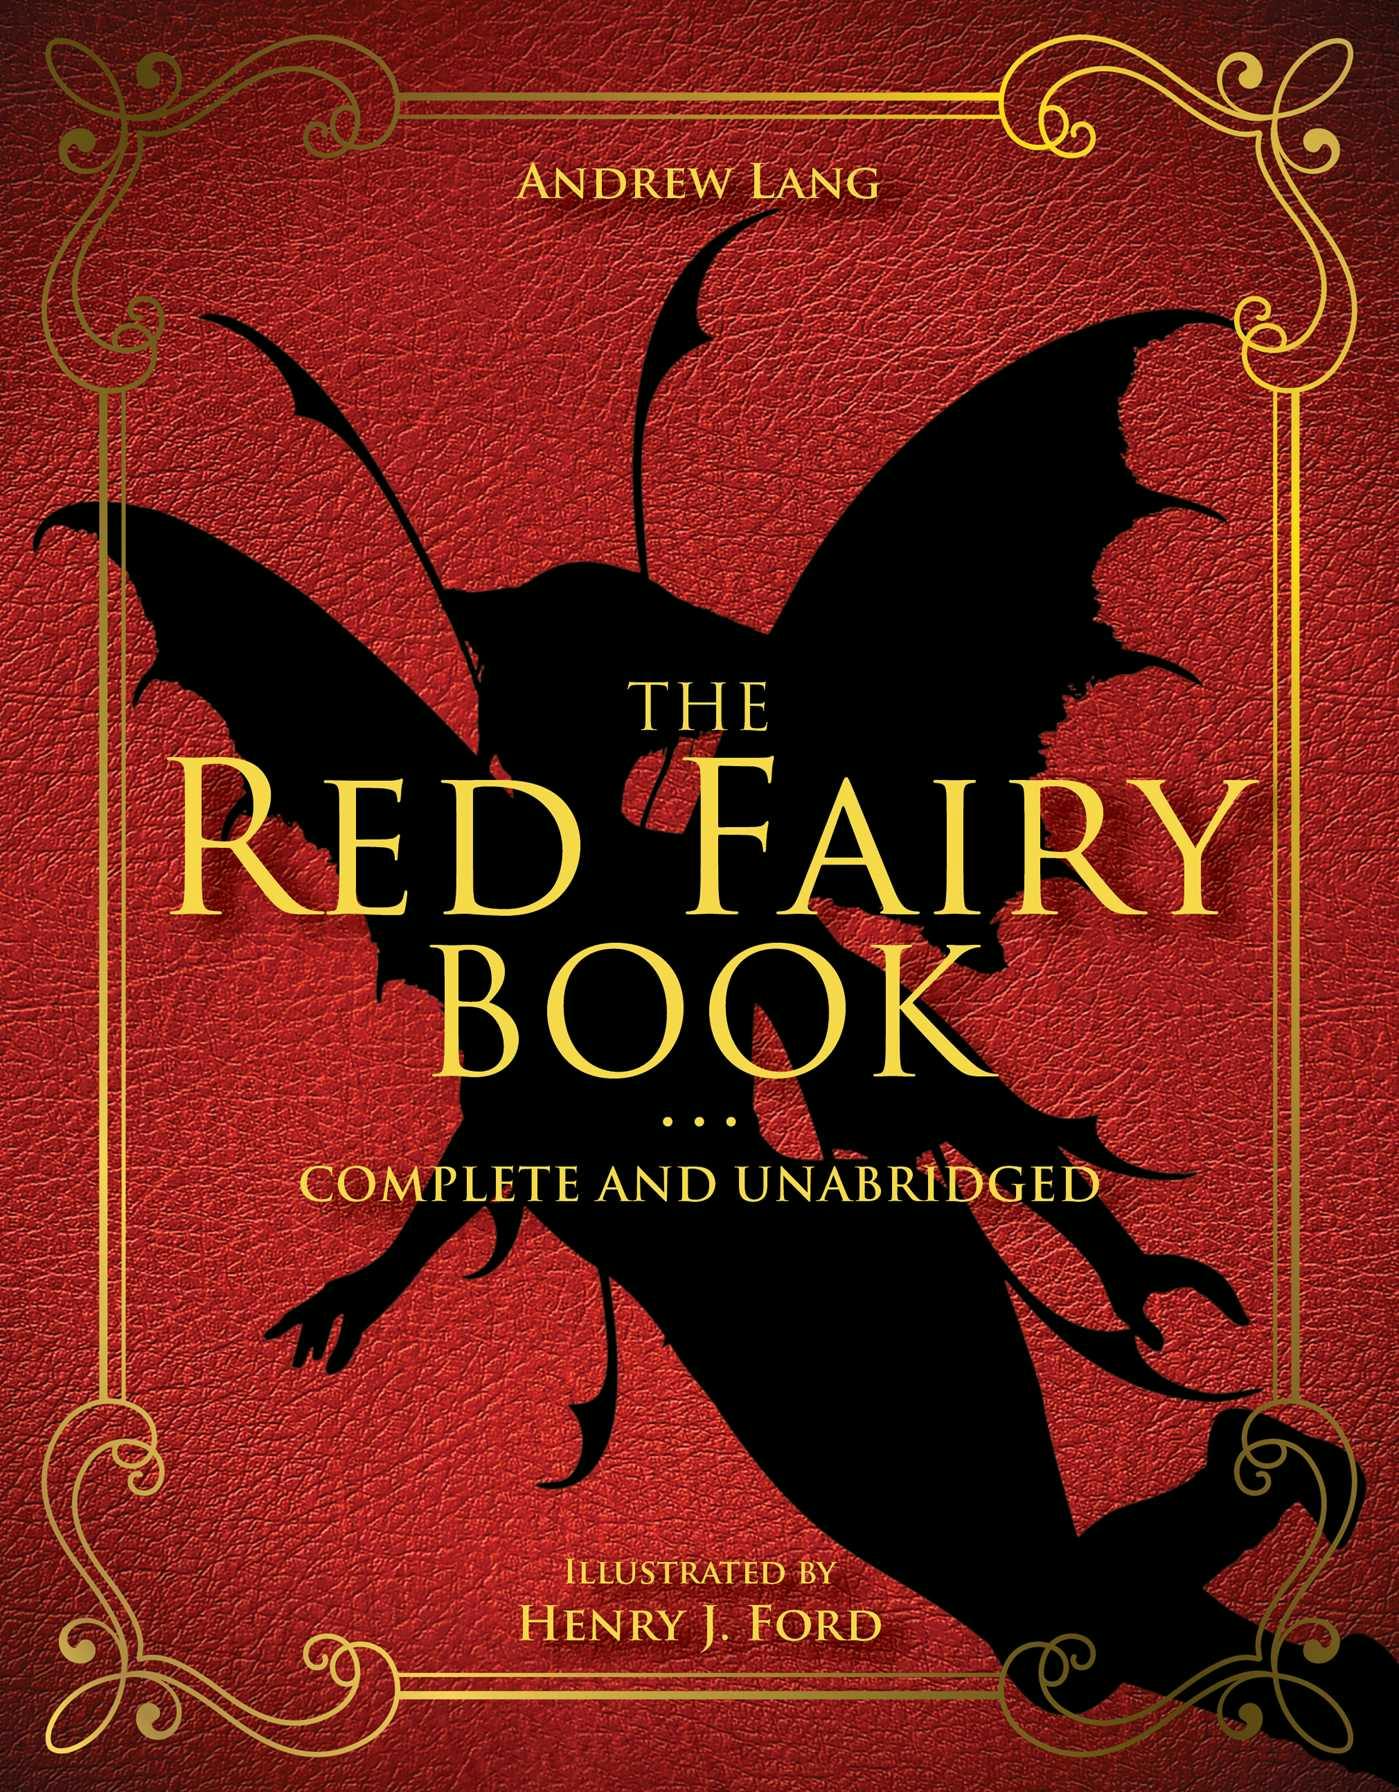 The Red Fairy Book: Complete and Unabridged - Andrew Lang